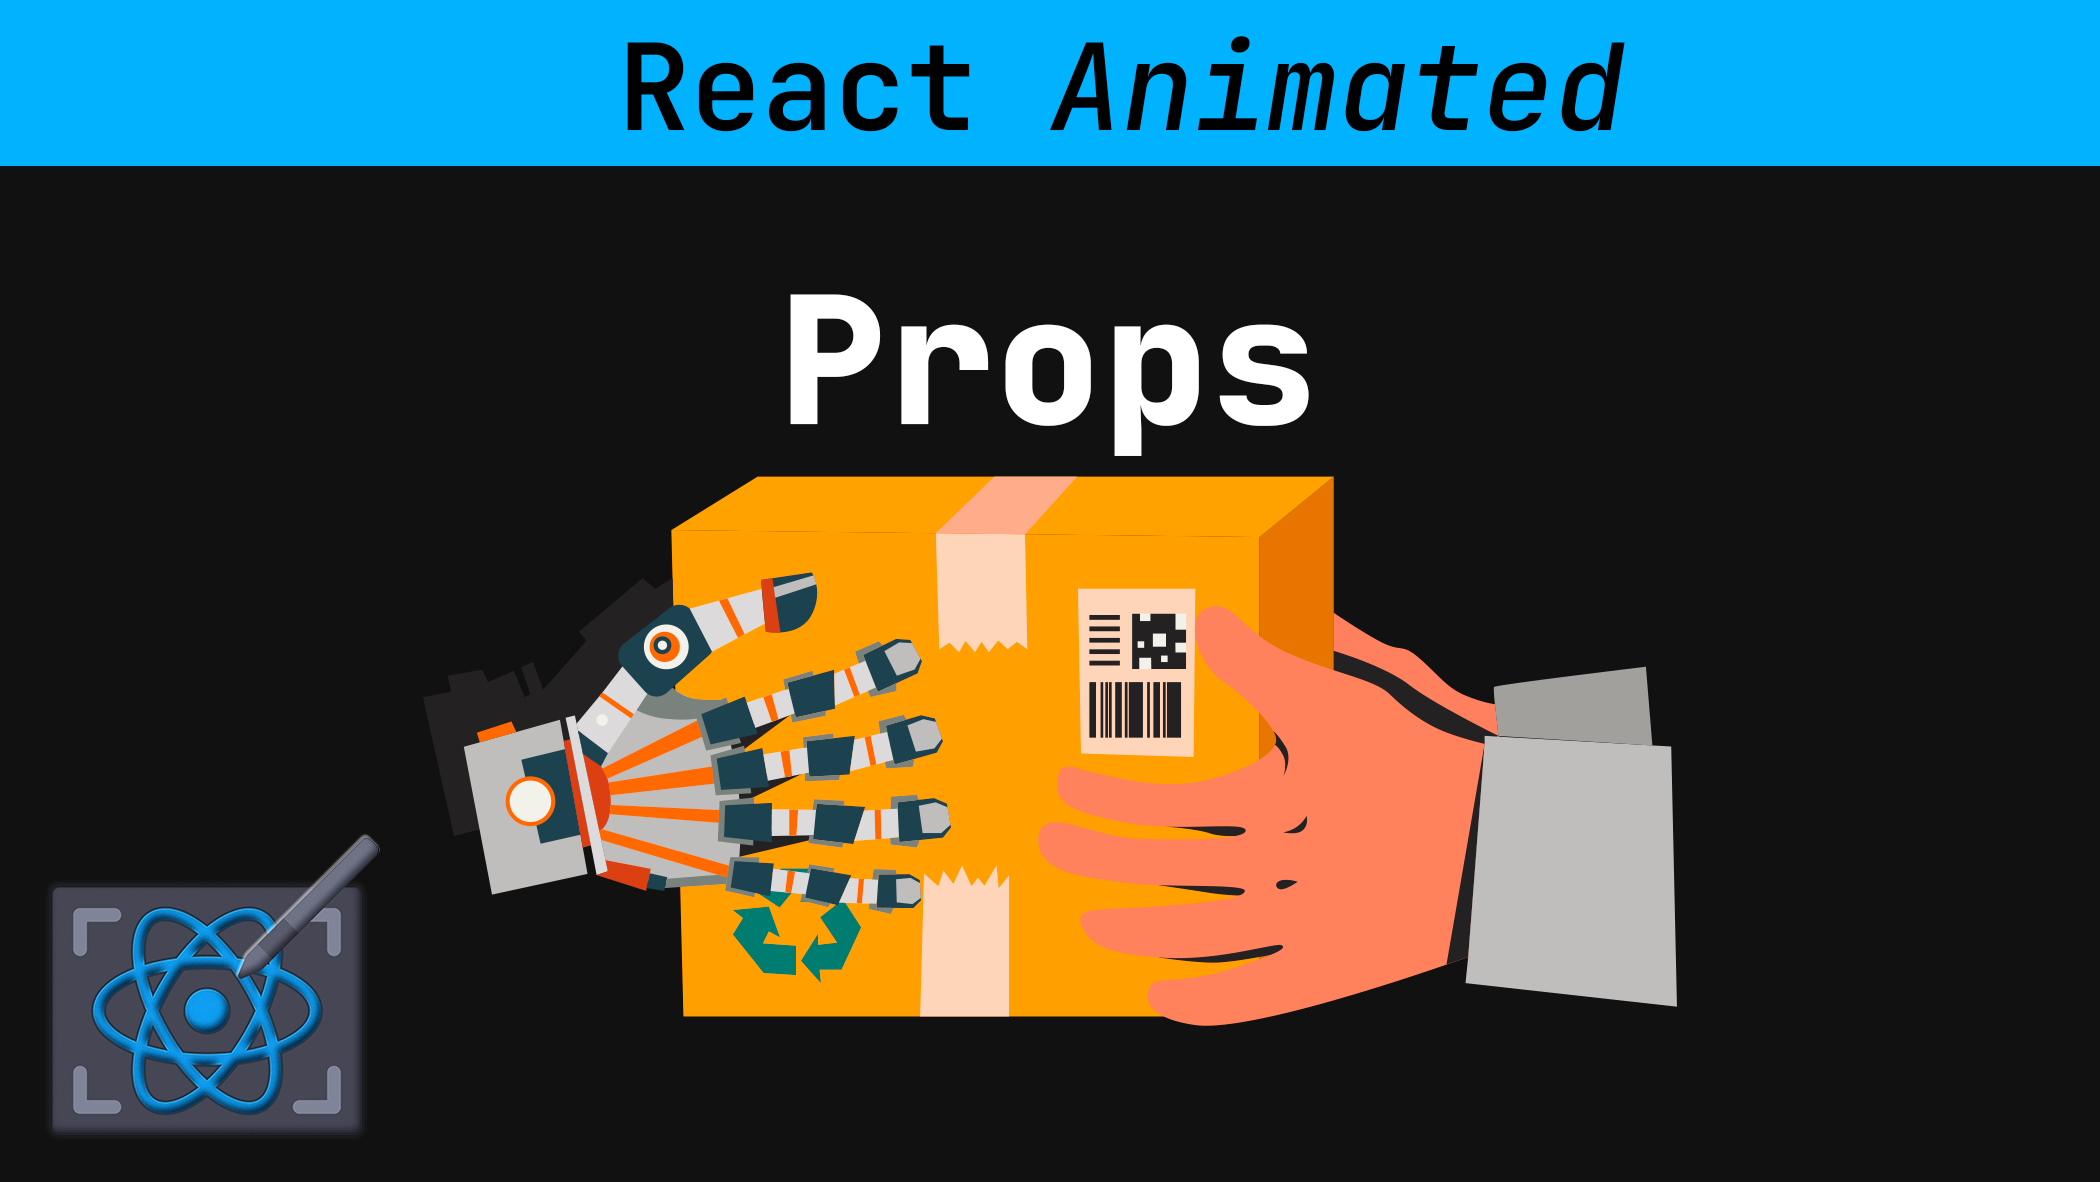 Image for Learn React Props – The Animated Guide